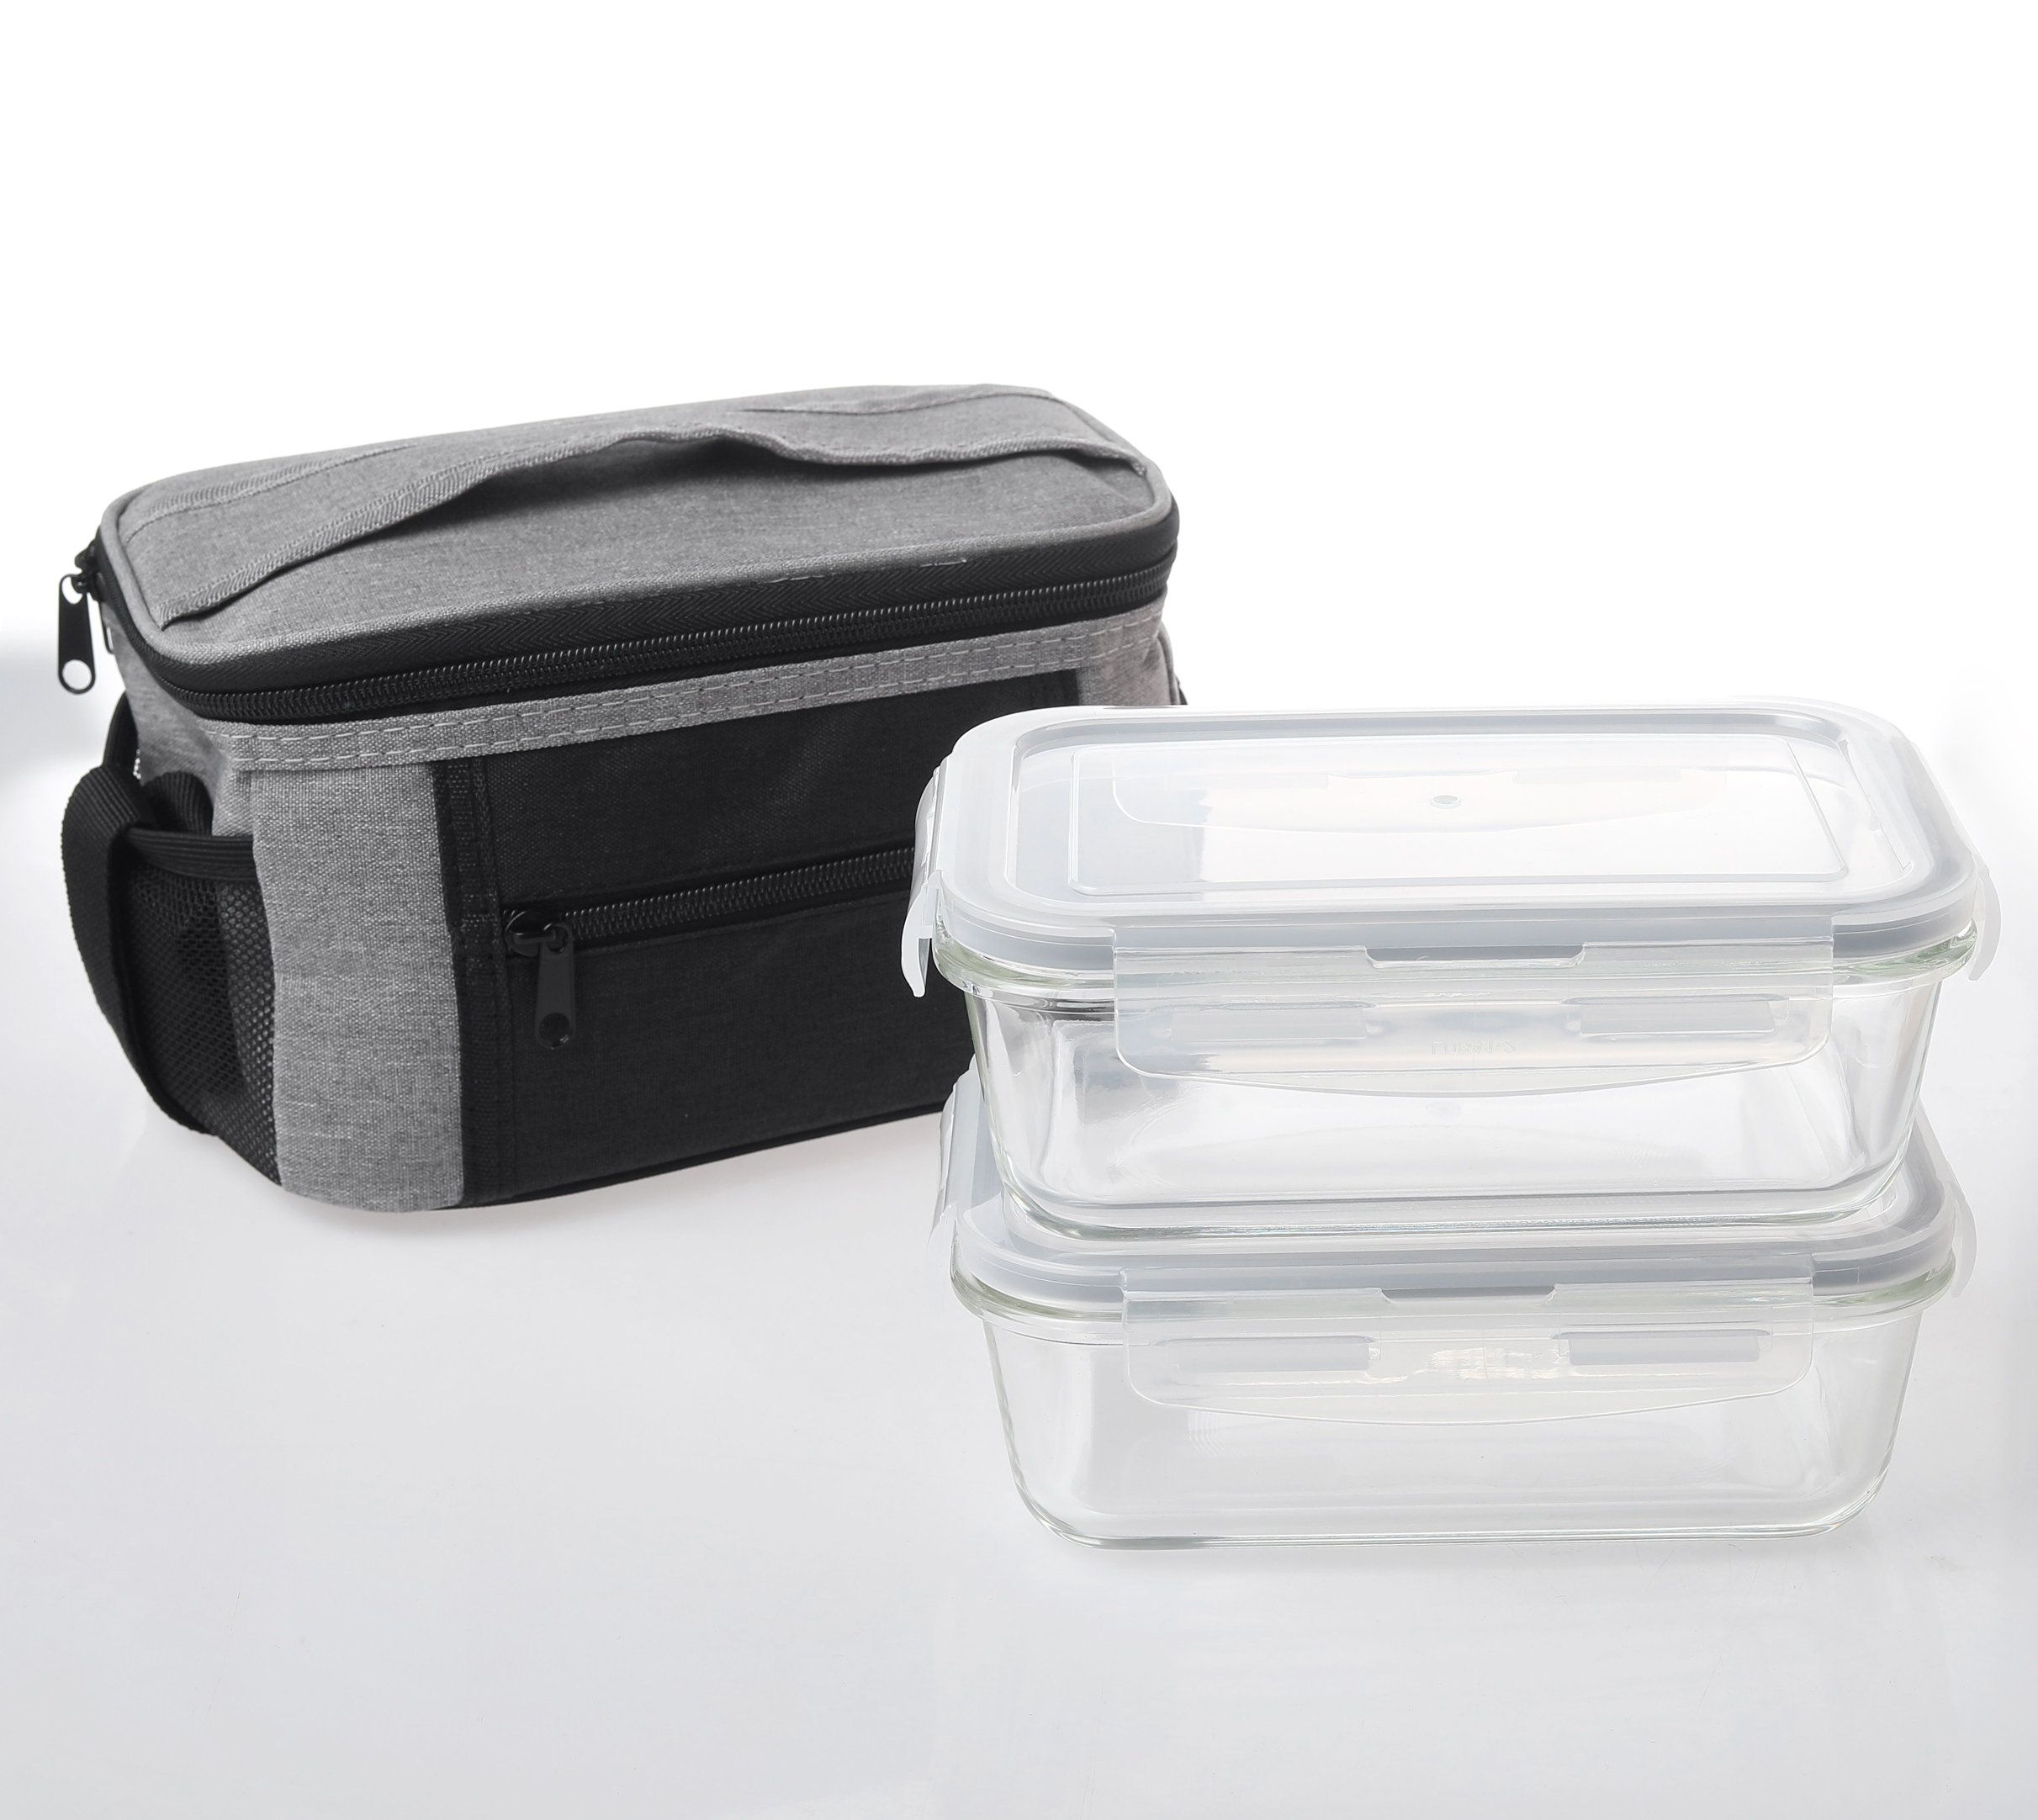 Tupperware Containers- Set of 2- Grey with black lid